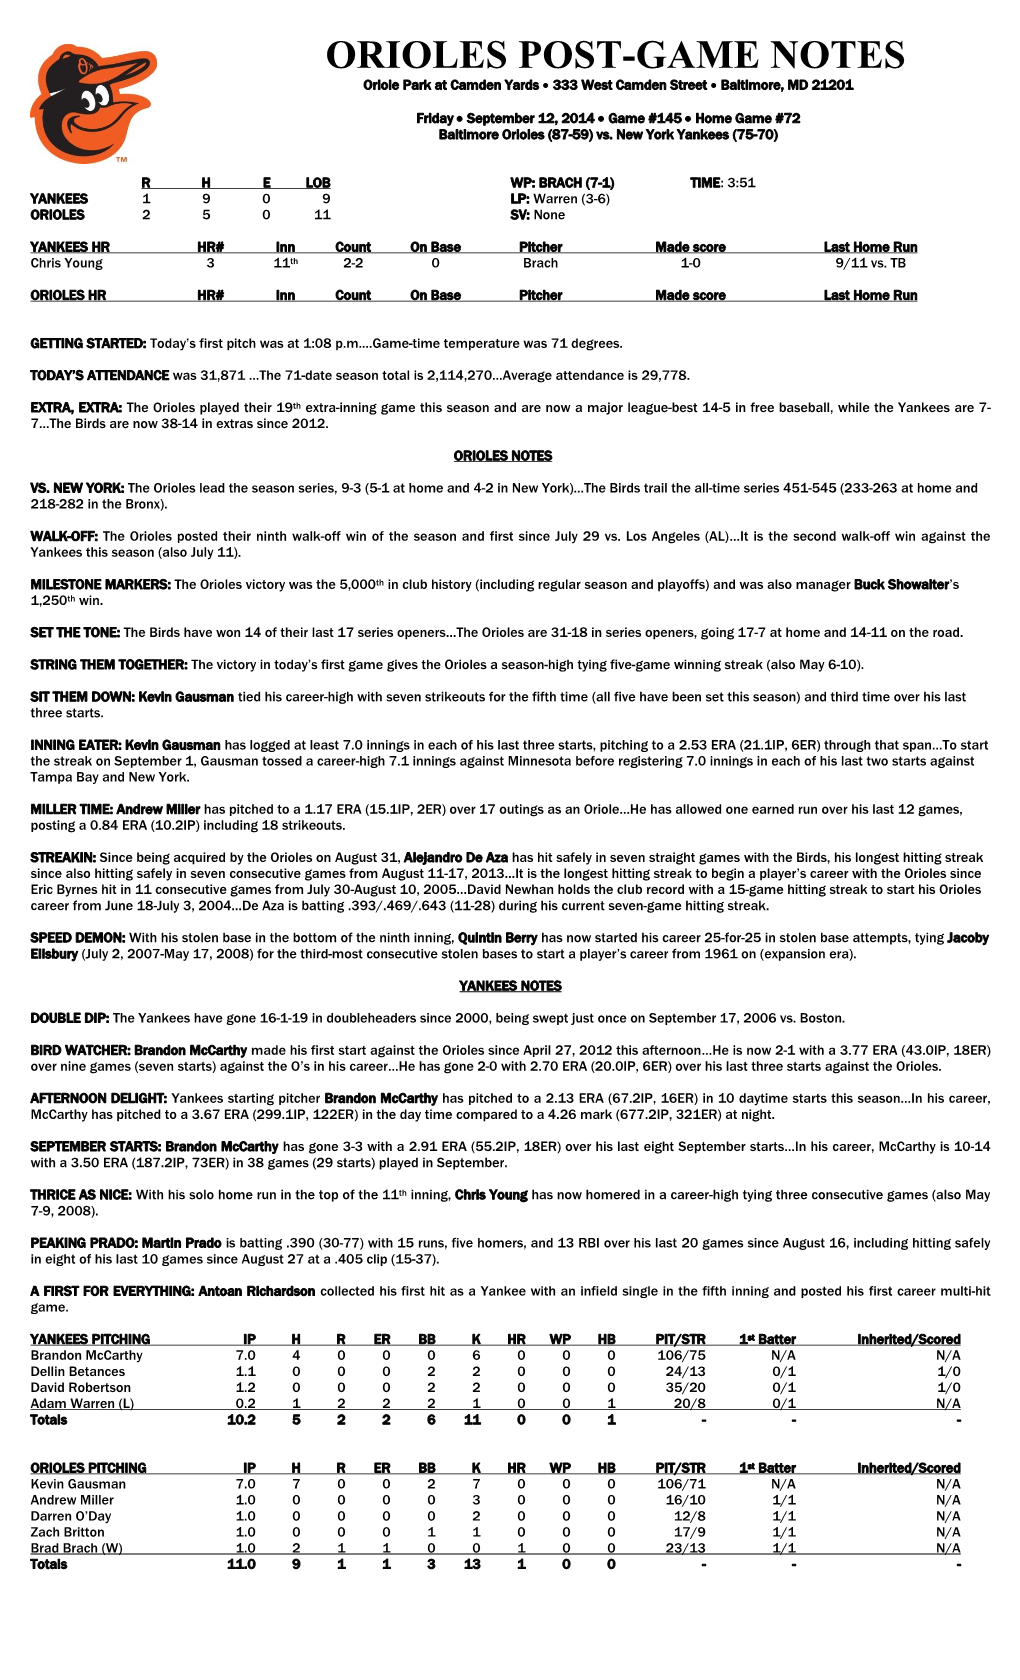 ORIOLES POST-GAME NOTES Oriole Park at Camden Yards  333 West Camden Street  Baltimore, MD 21201